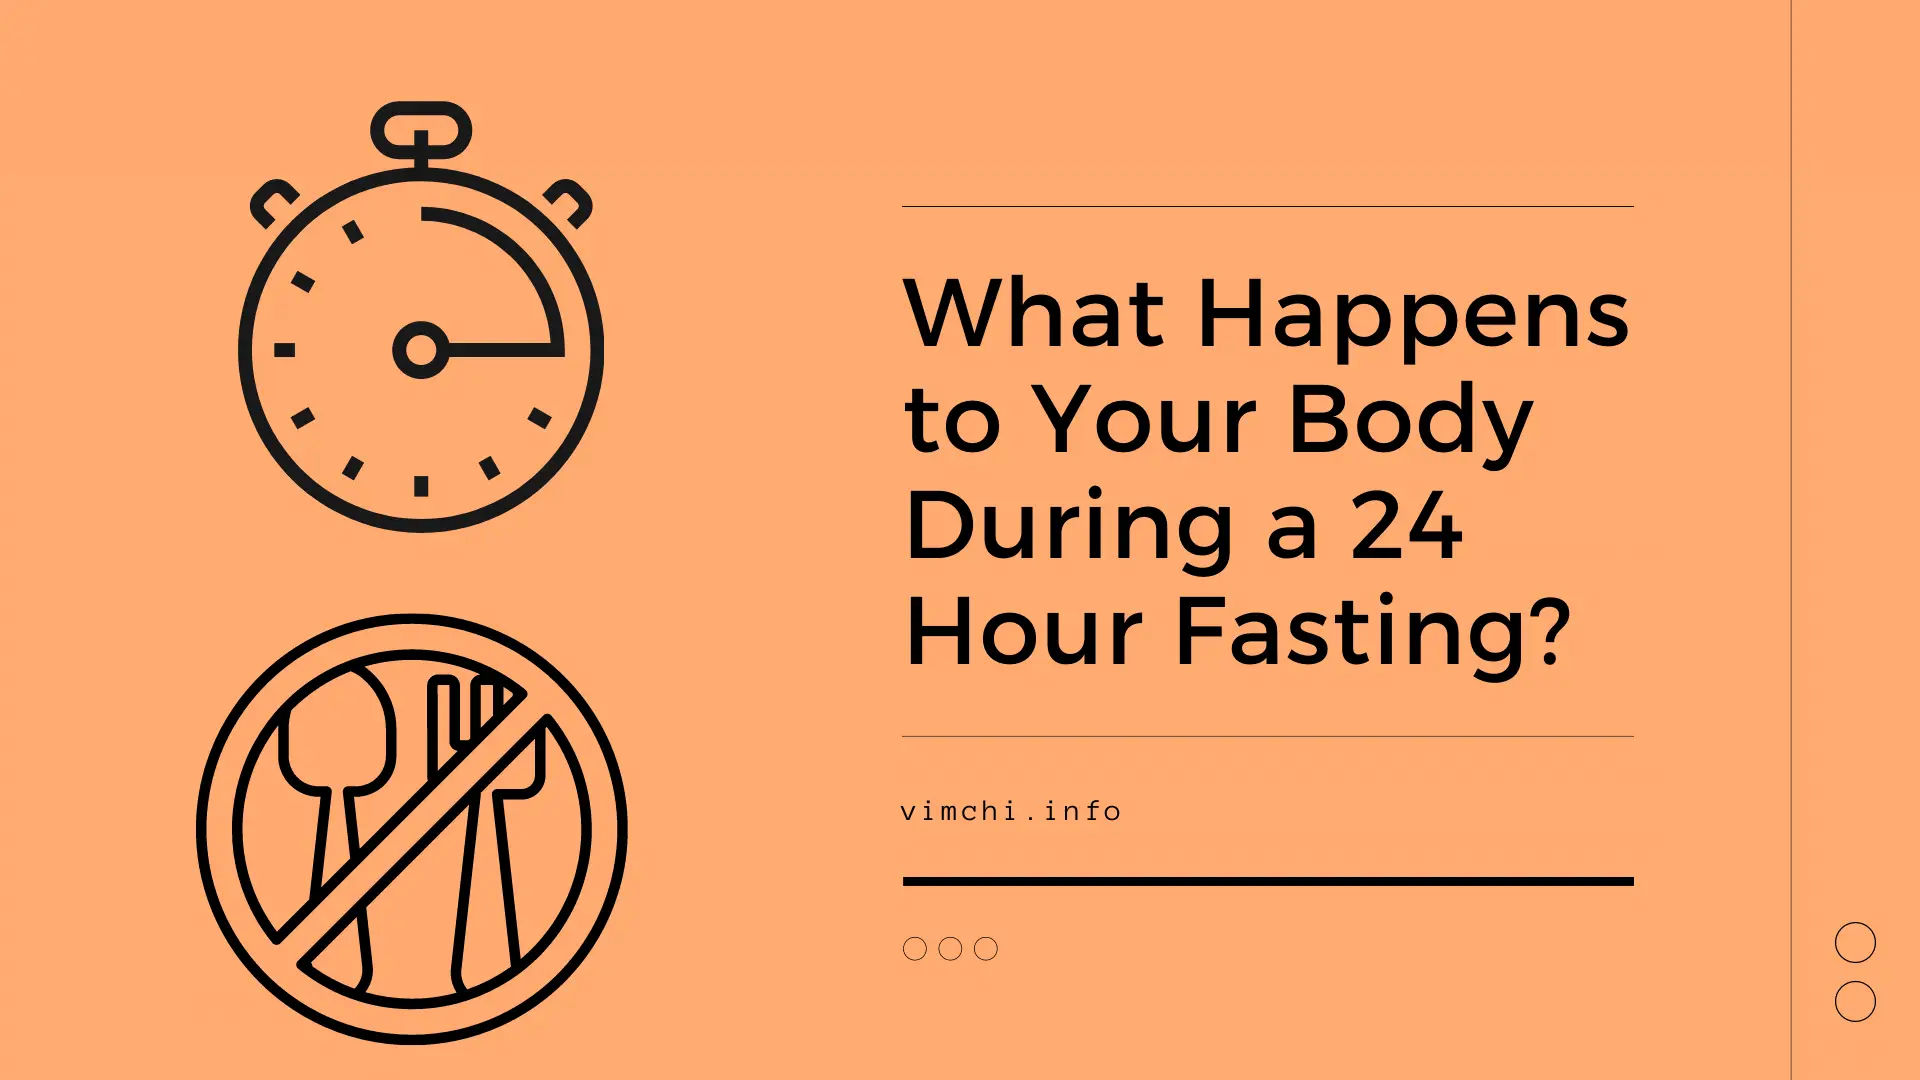 What Happens to Your Body During a 24 Hour Fasting